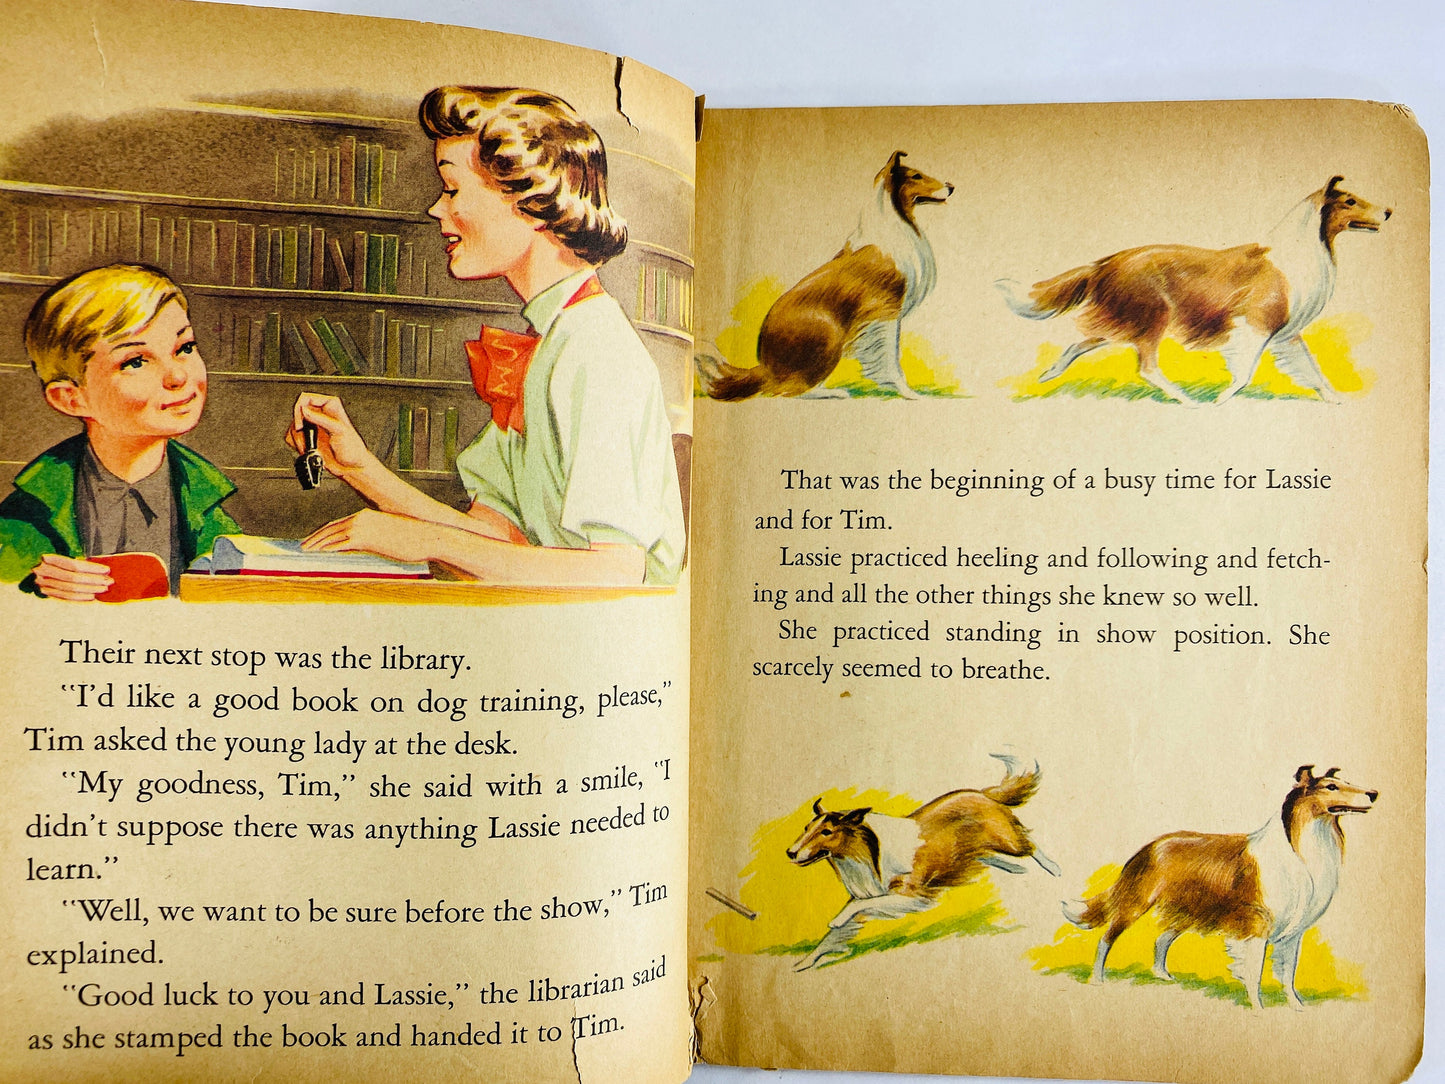 Lassie Shows the Way vintage Little Golden Book. POOR CONDITION Children's book. Torn pages Please see pictures